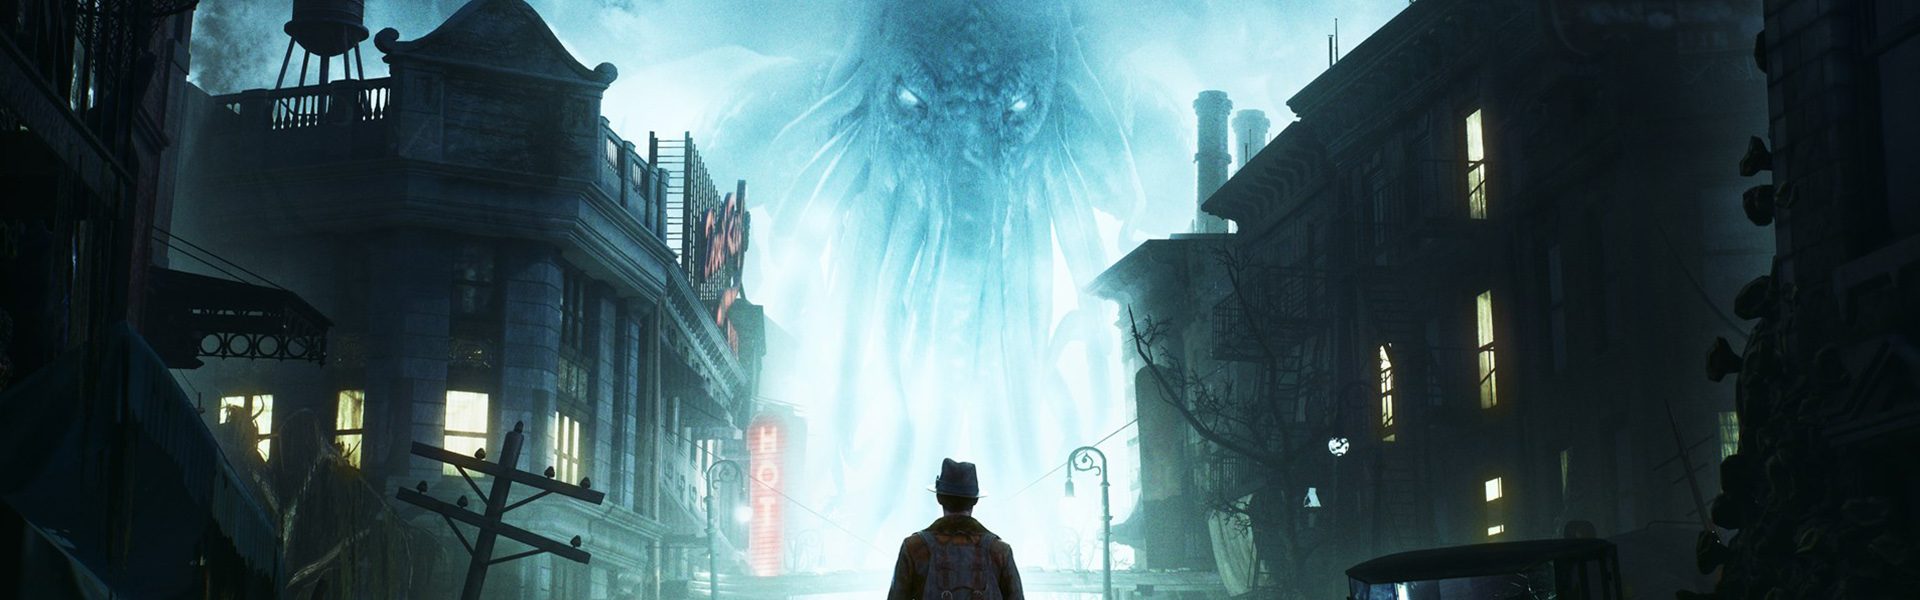 5 things to look out for in Lovecraftian detective thriller The Sinking ...